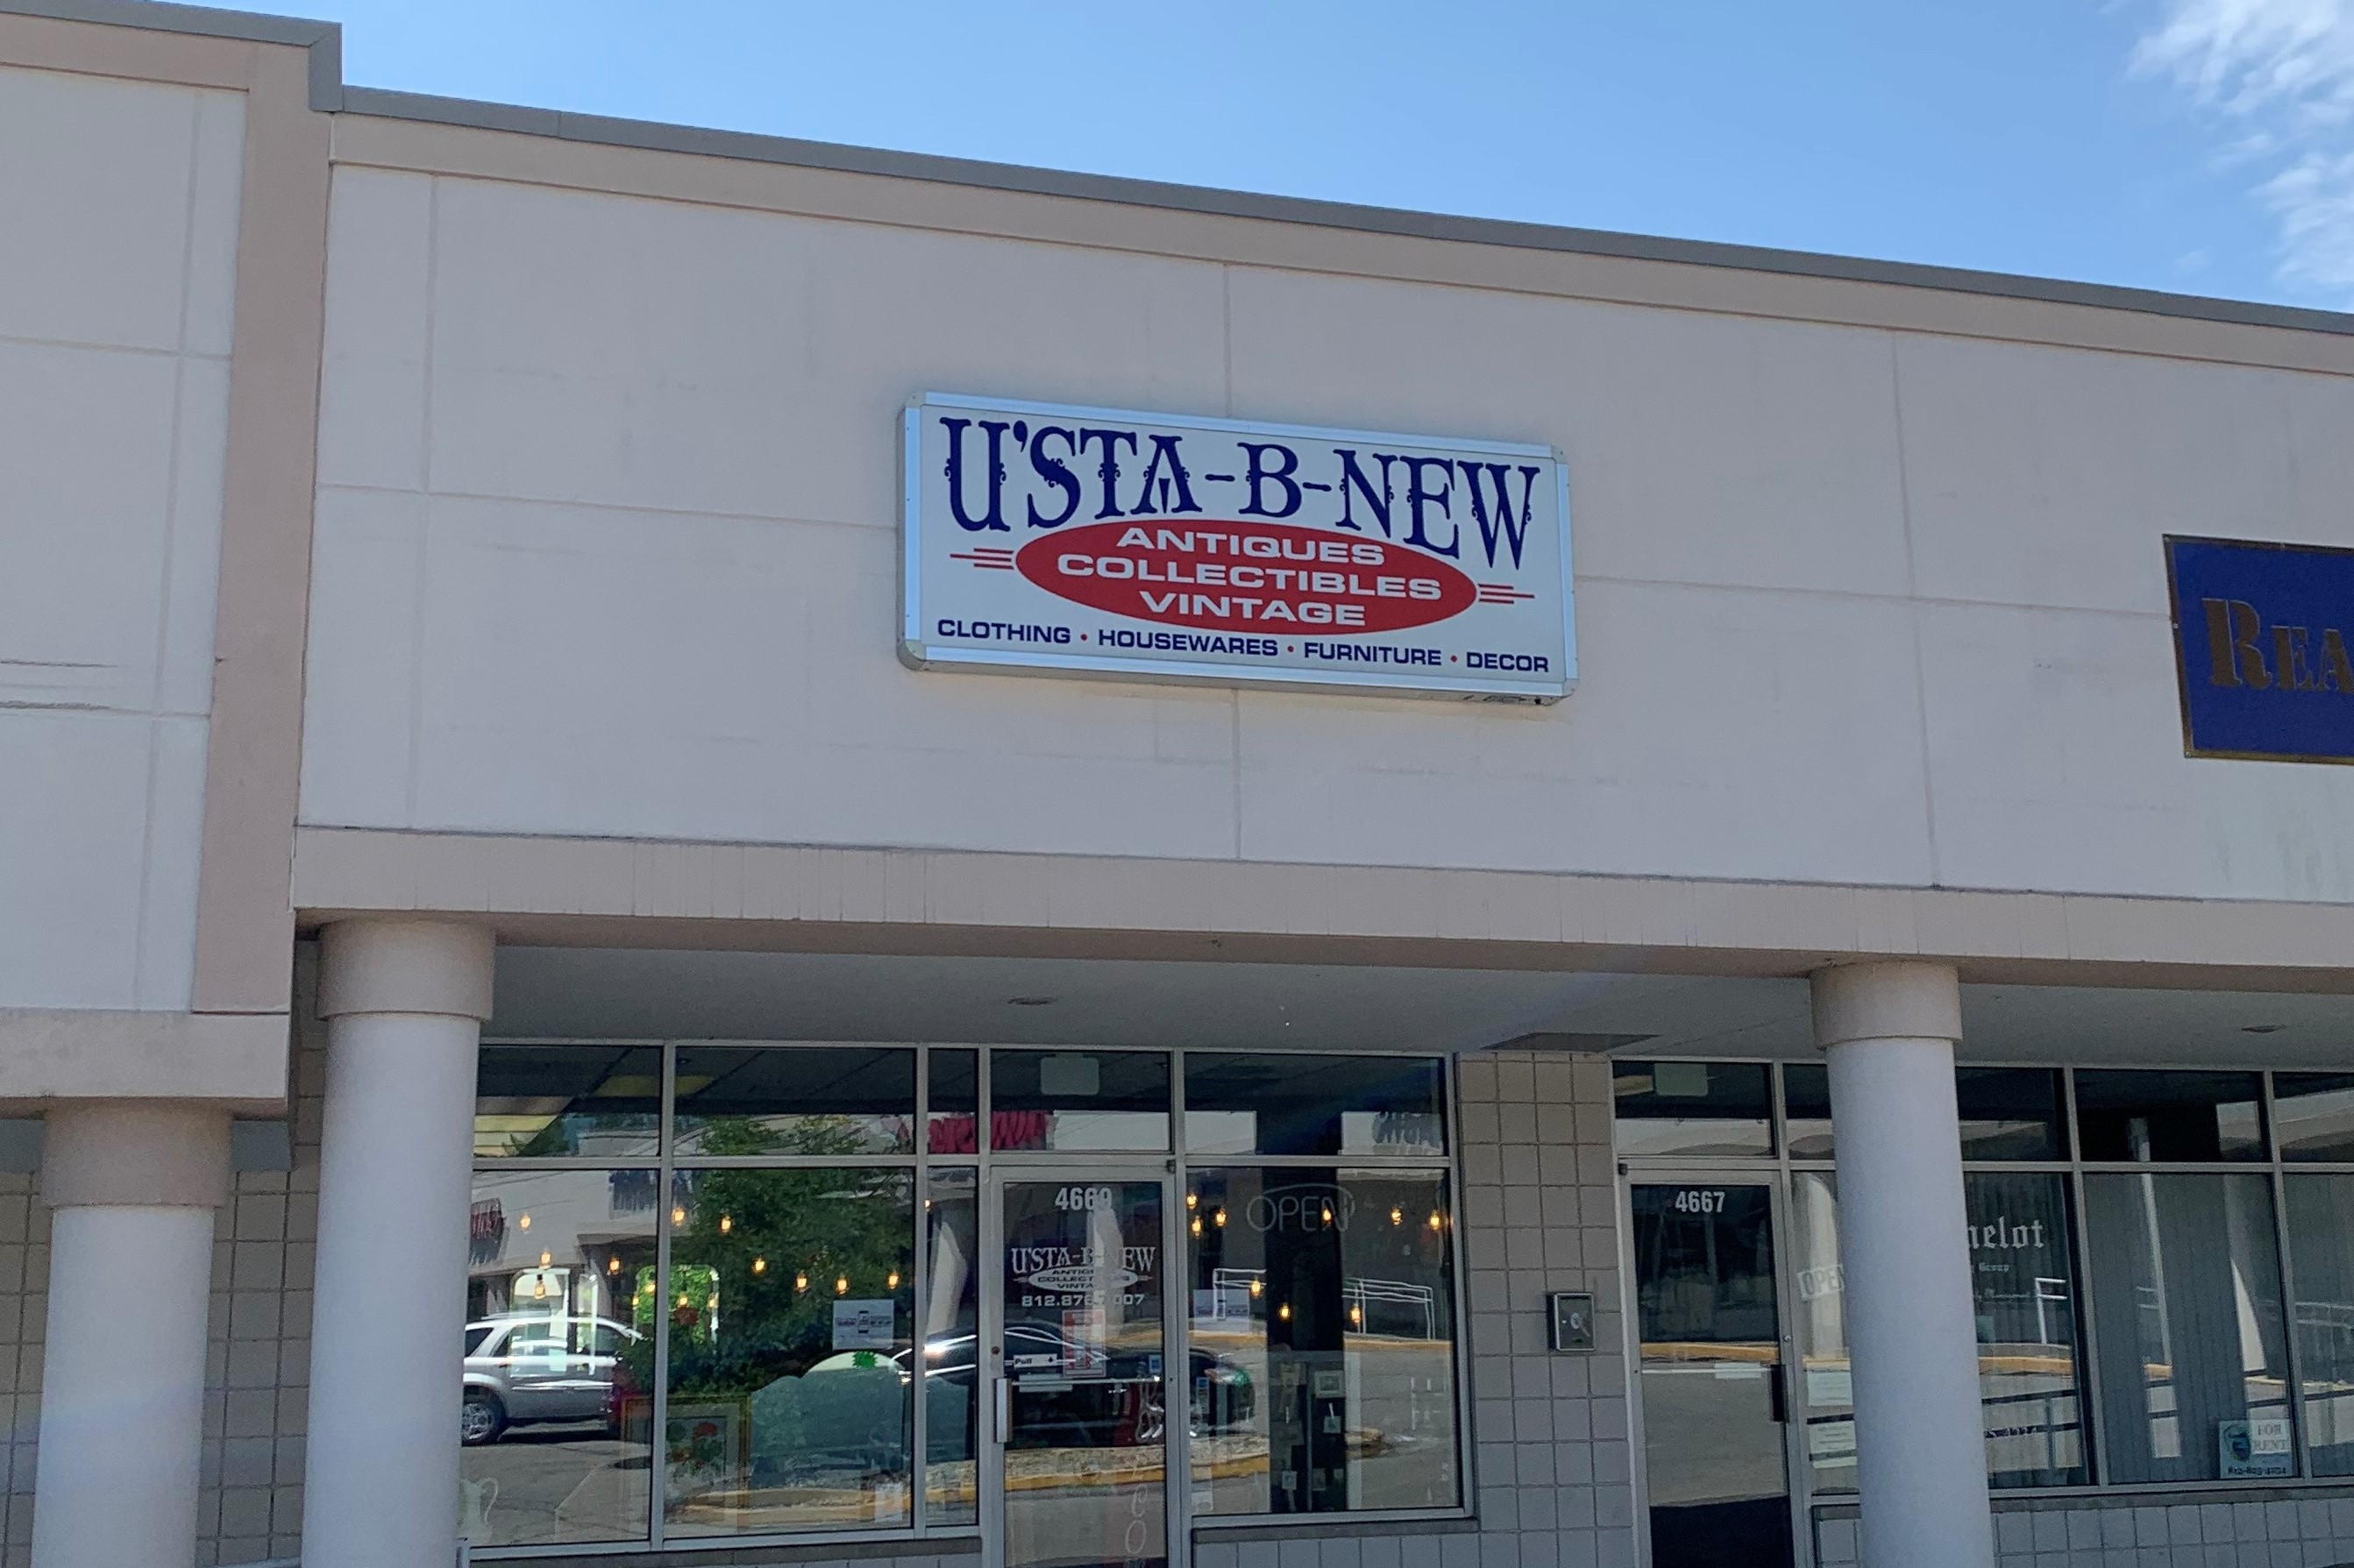 A photo of the Usta-B-New furniture storefront.